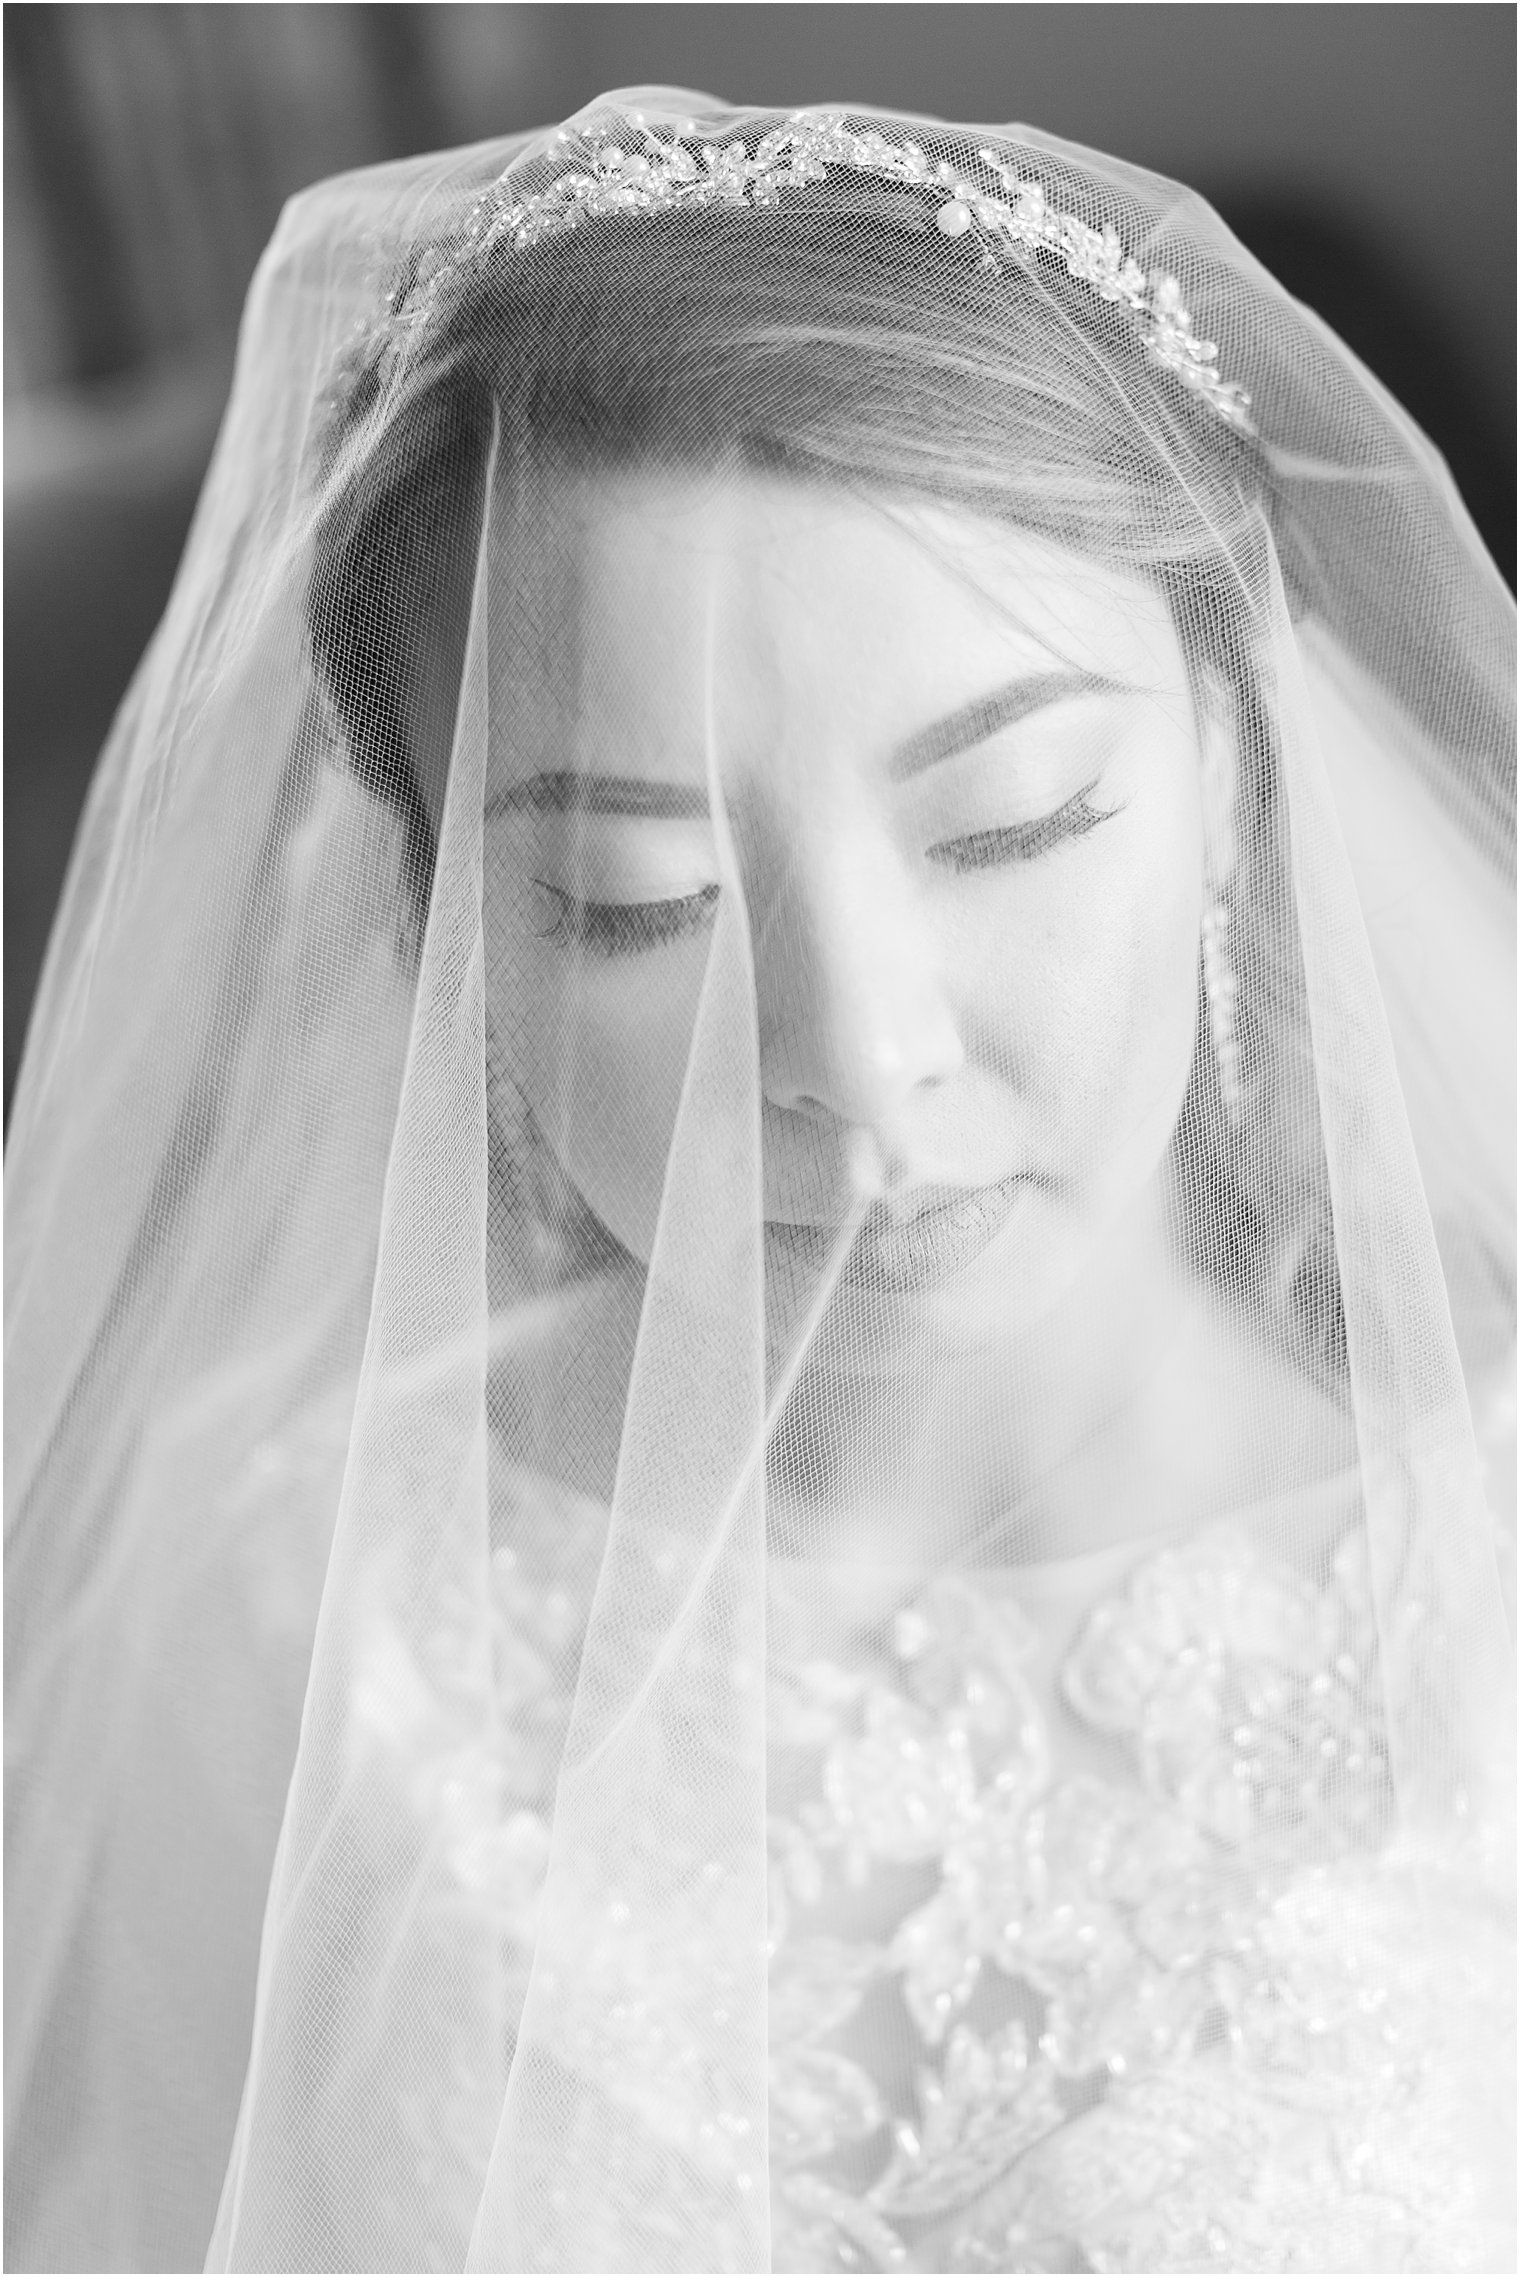 Black and white portrait of bride and her veil